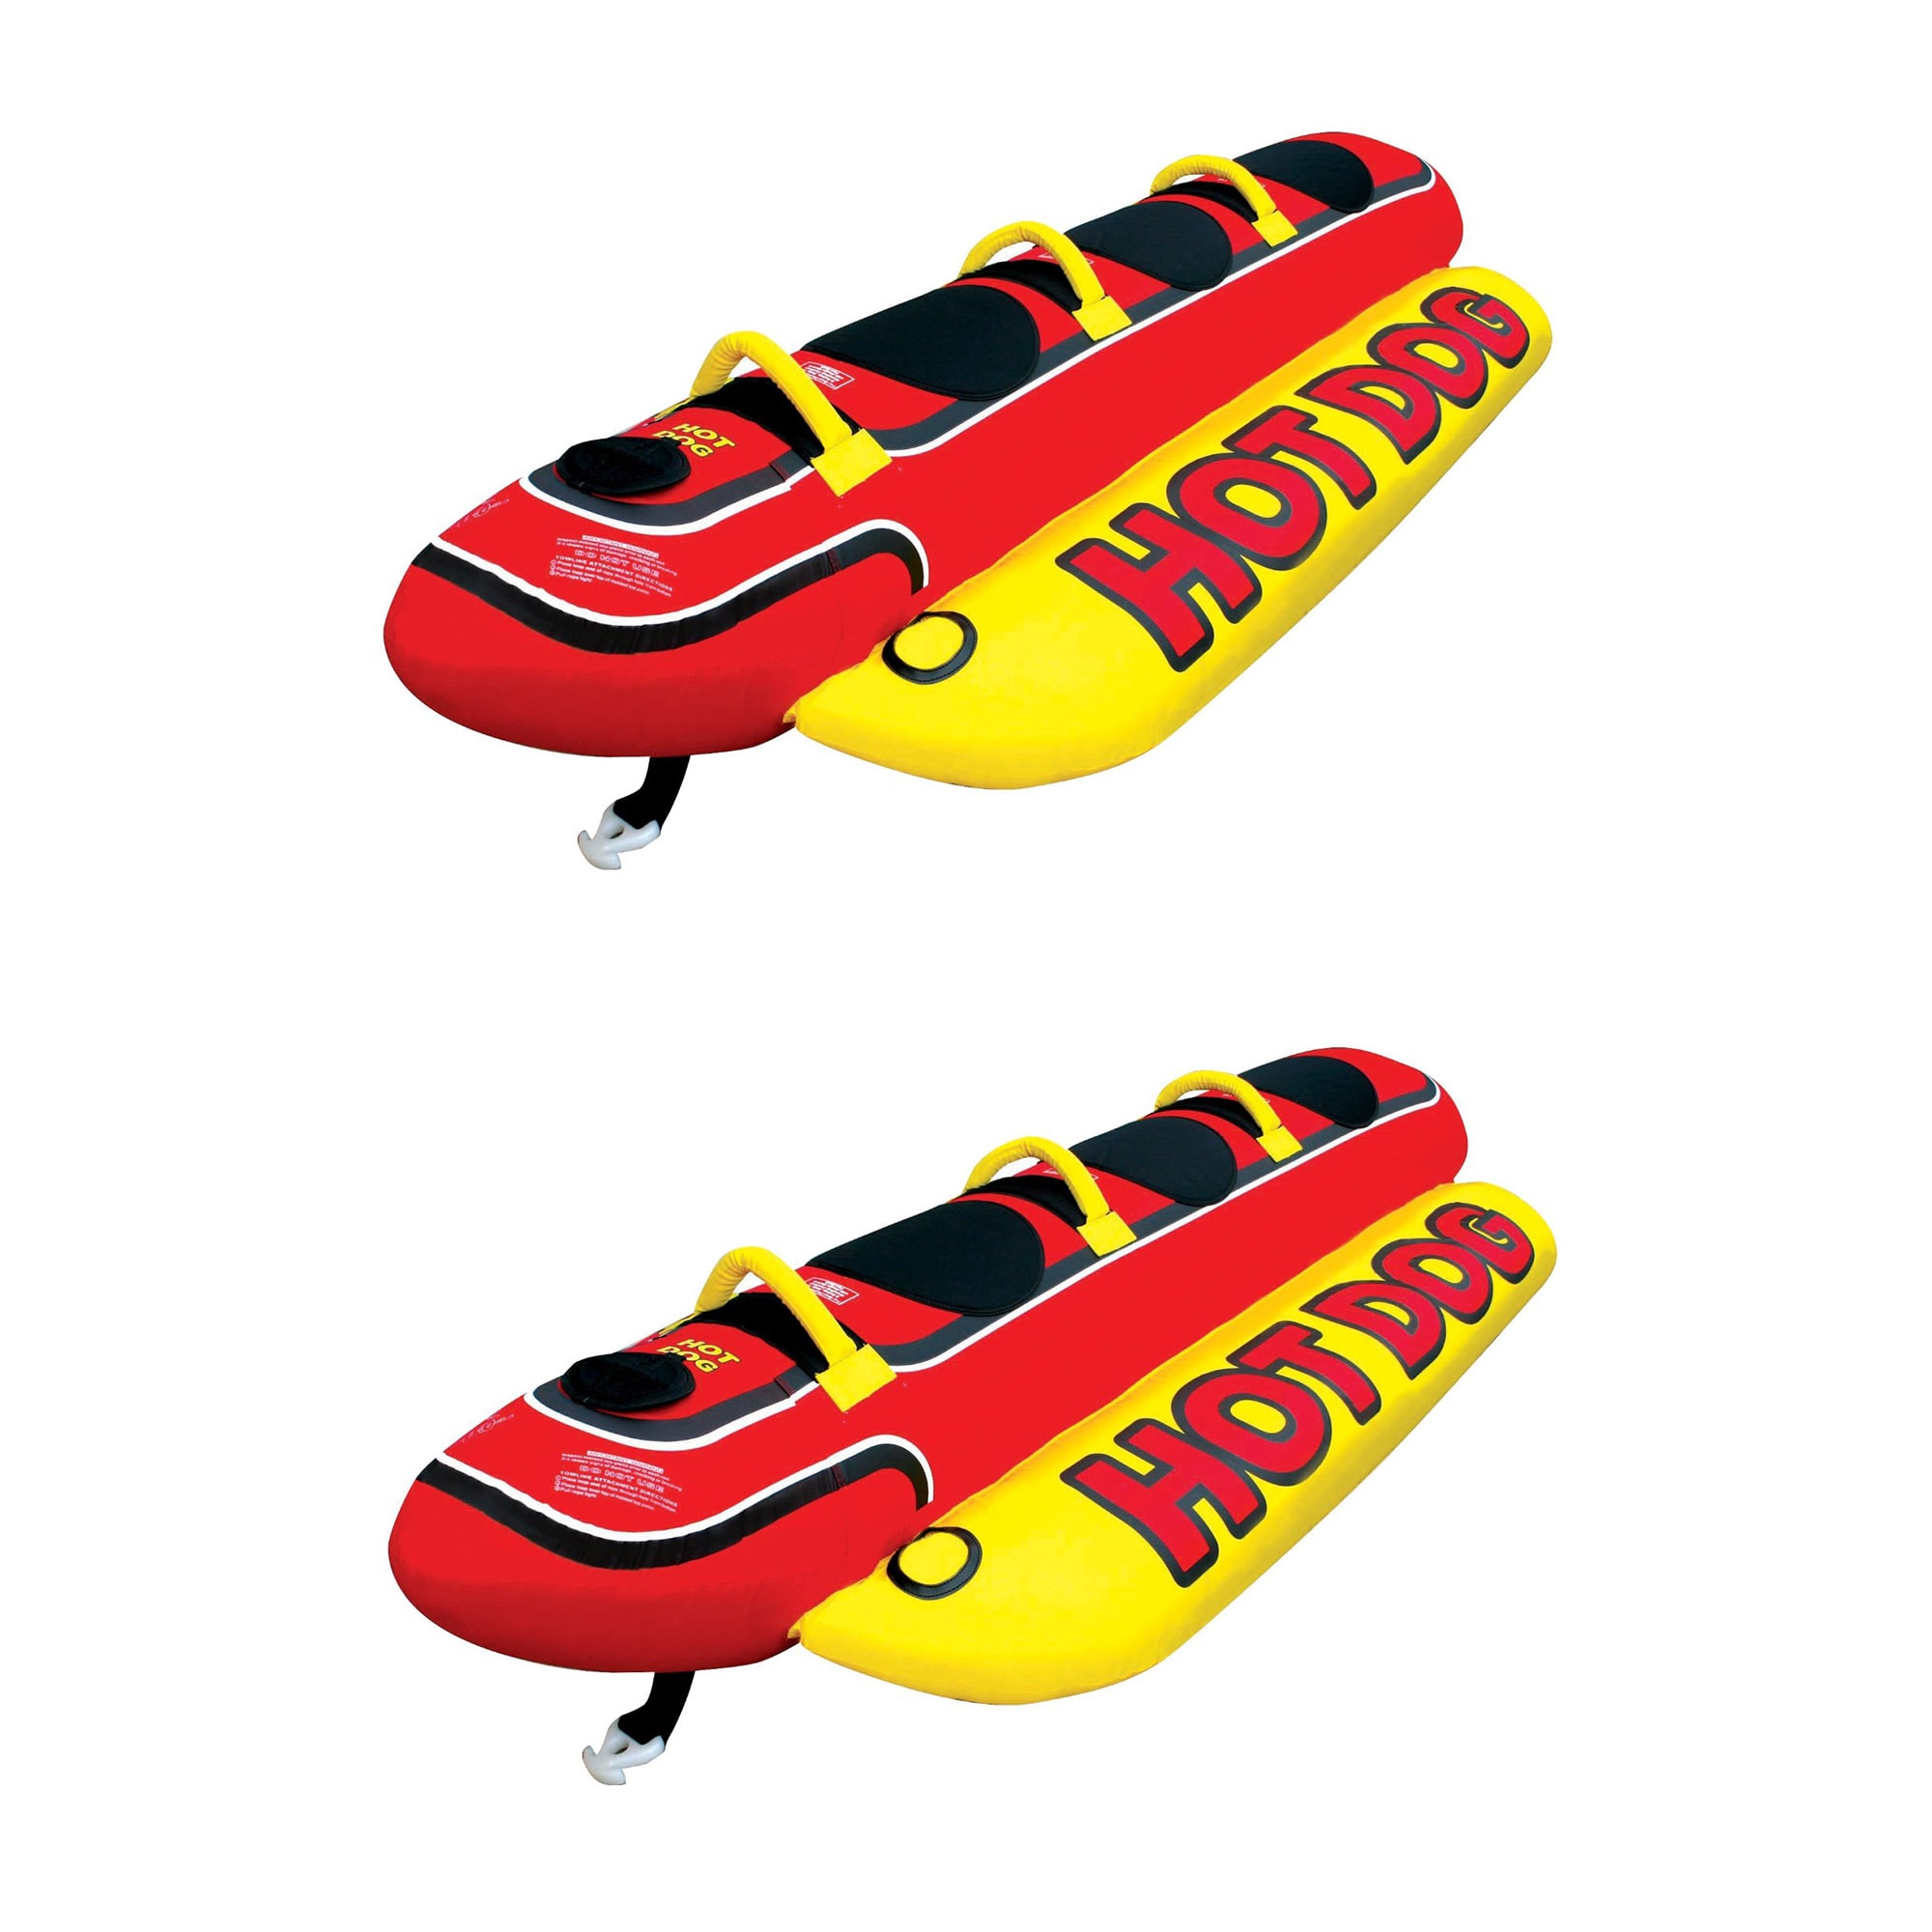 Hot Dog Inflatable Towable 3 Rider Lake Swimming Tube Boating Water Sport Float 